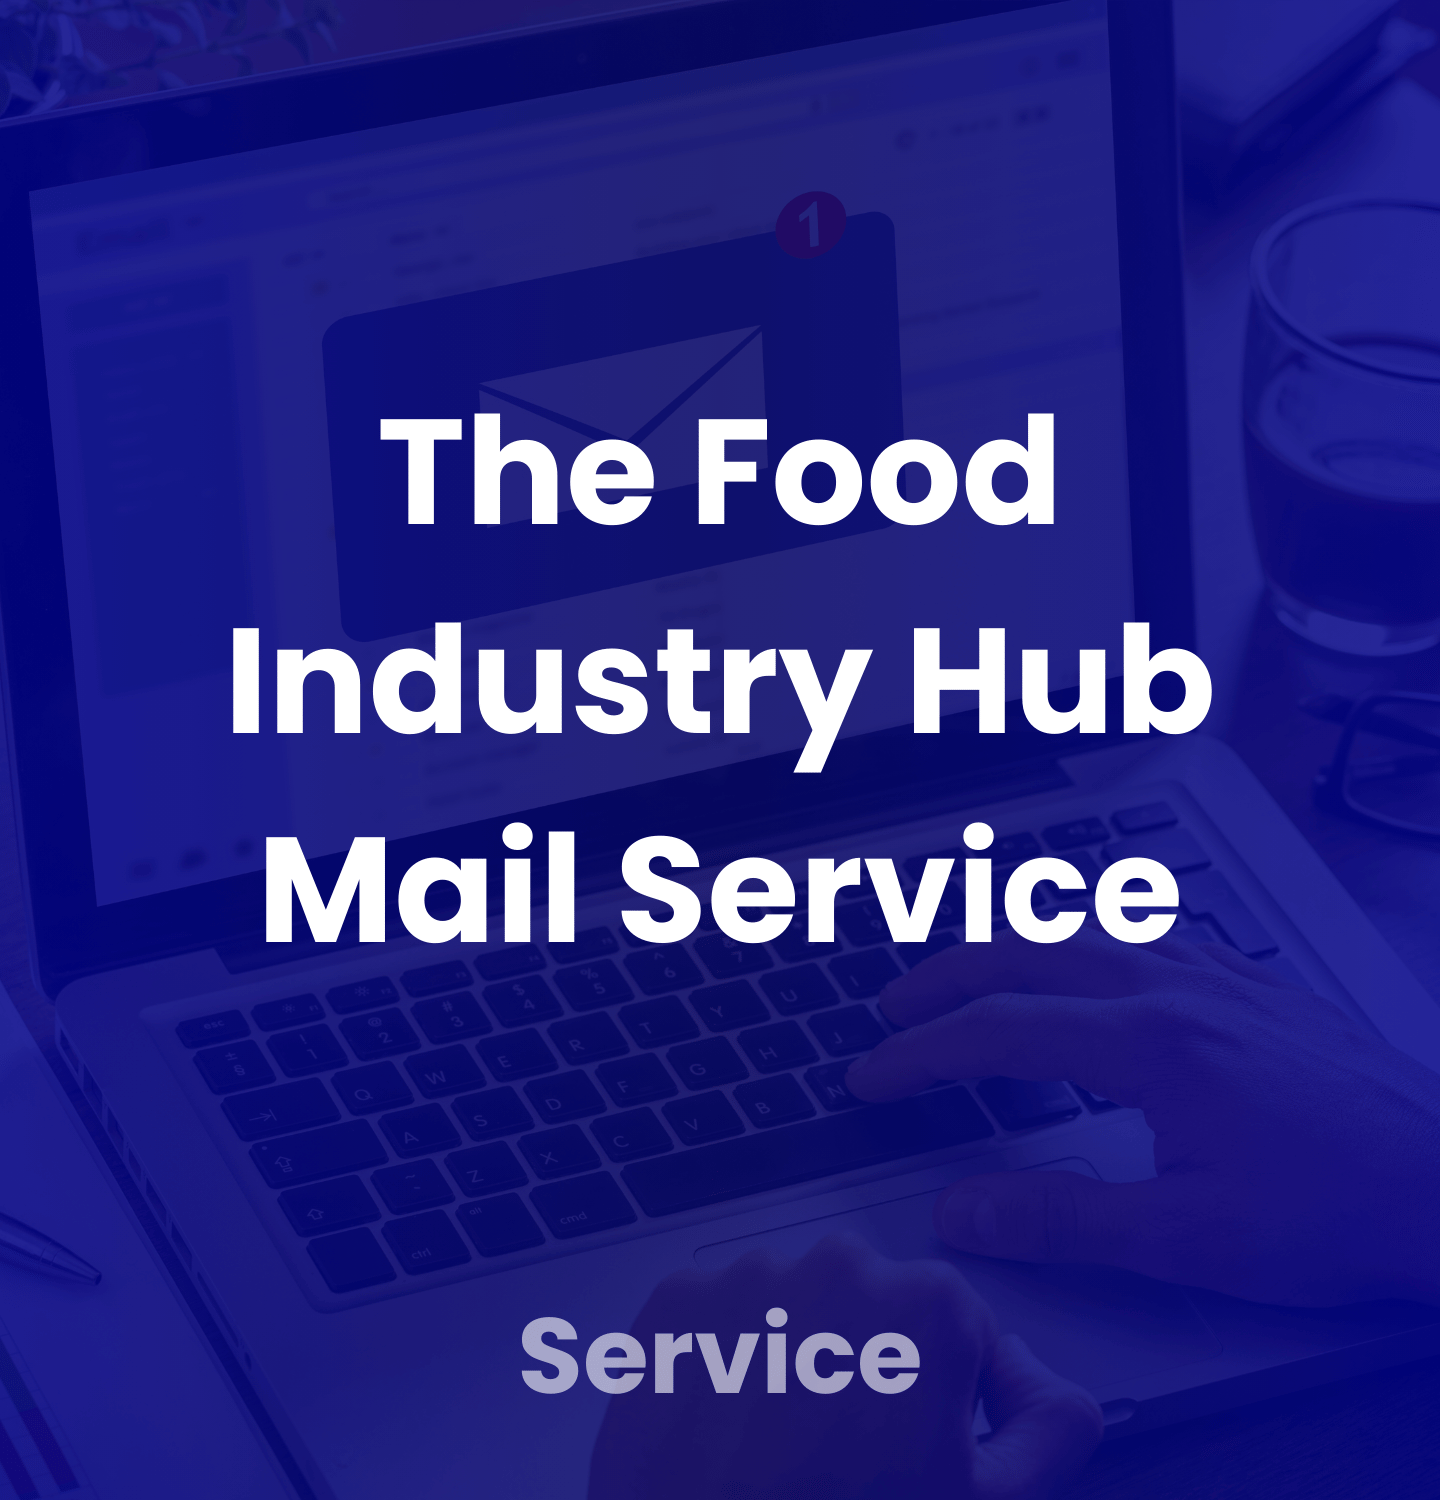 Signup for The Food Industry Hub Mail Service